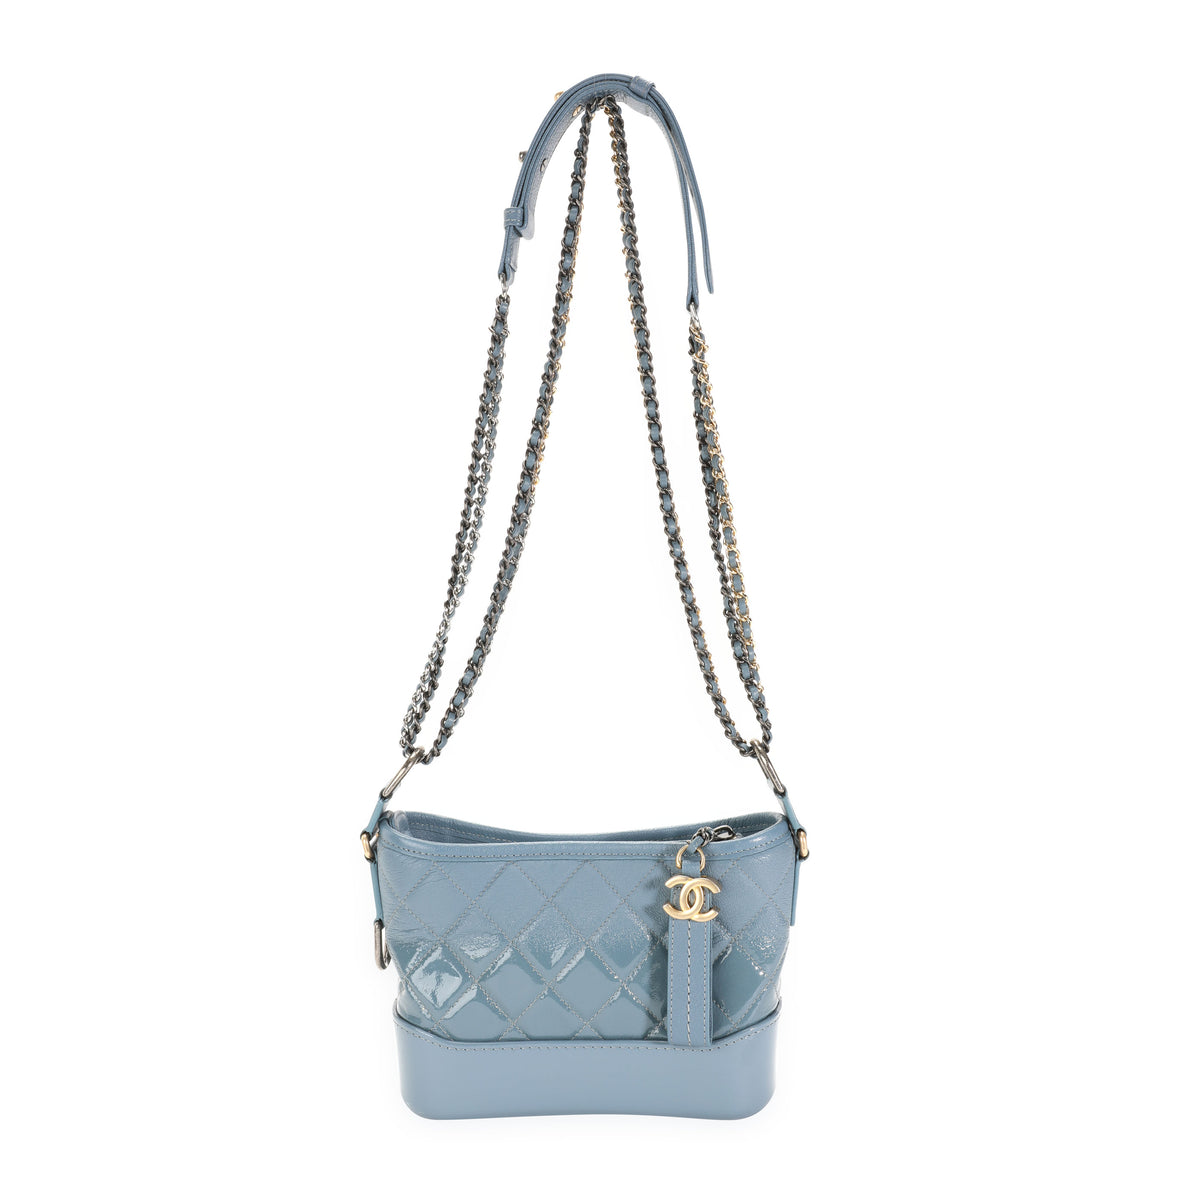 Chanel Blue Ombré Quilted Patent Leather & Aged Calfskin Small Gabrielle Hobo